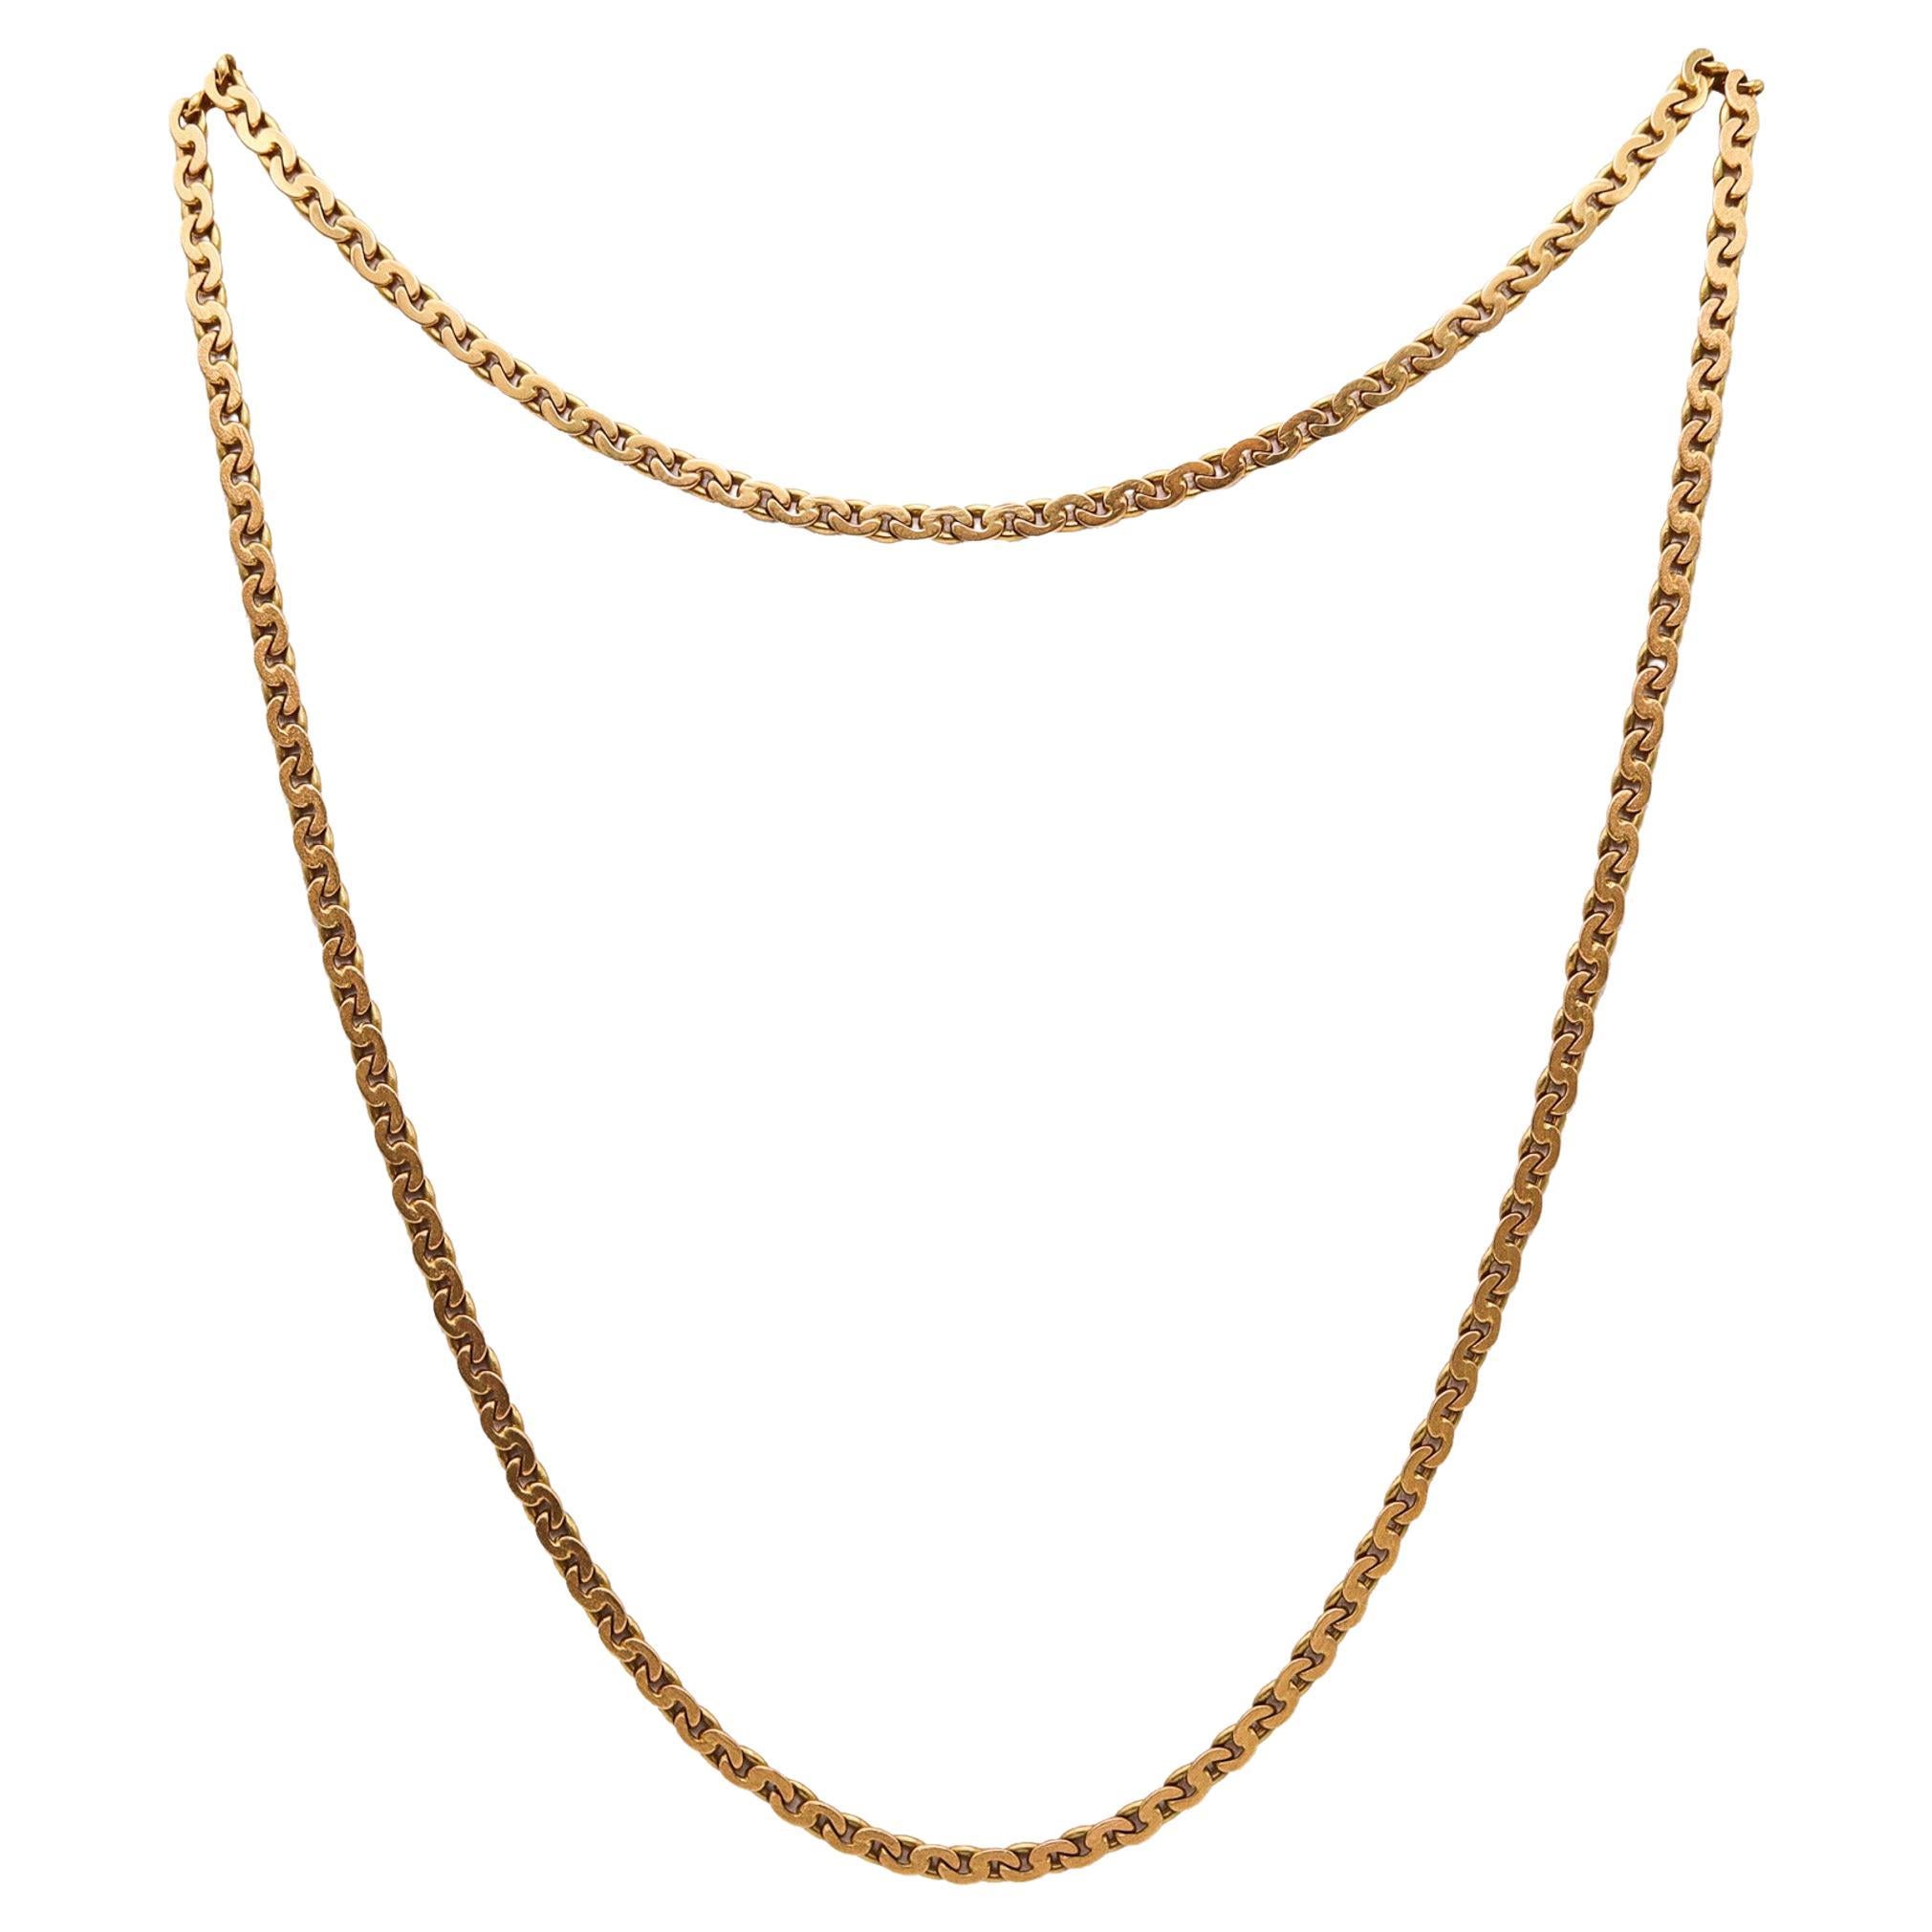 Marchisio Napoleone 1935 Italian Art Deco Long Chain In Solid 18Kt Yellow Gold